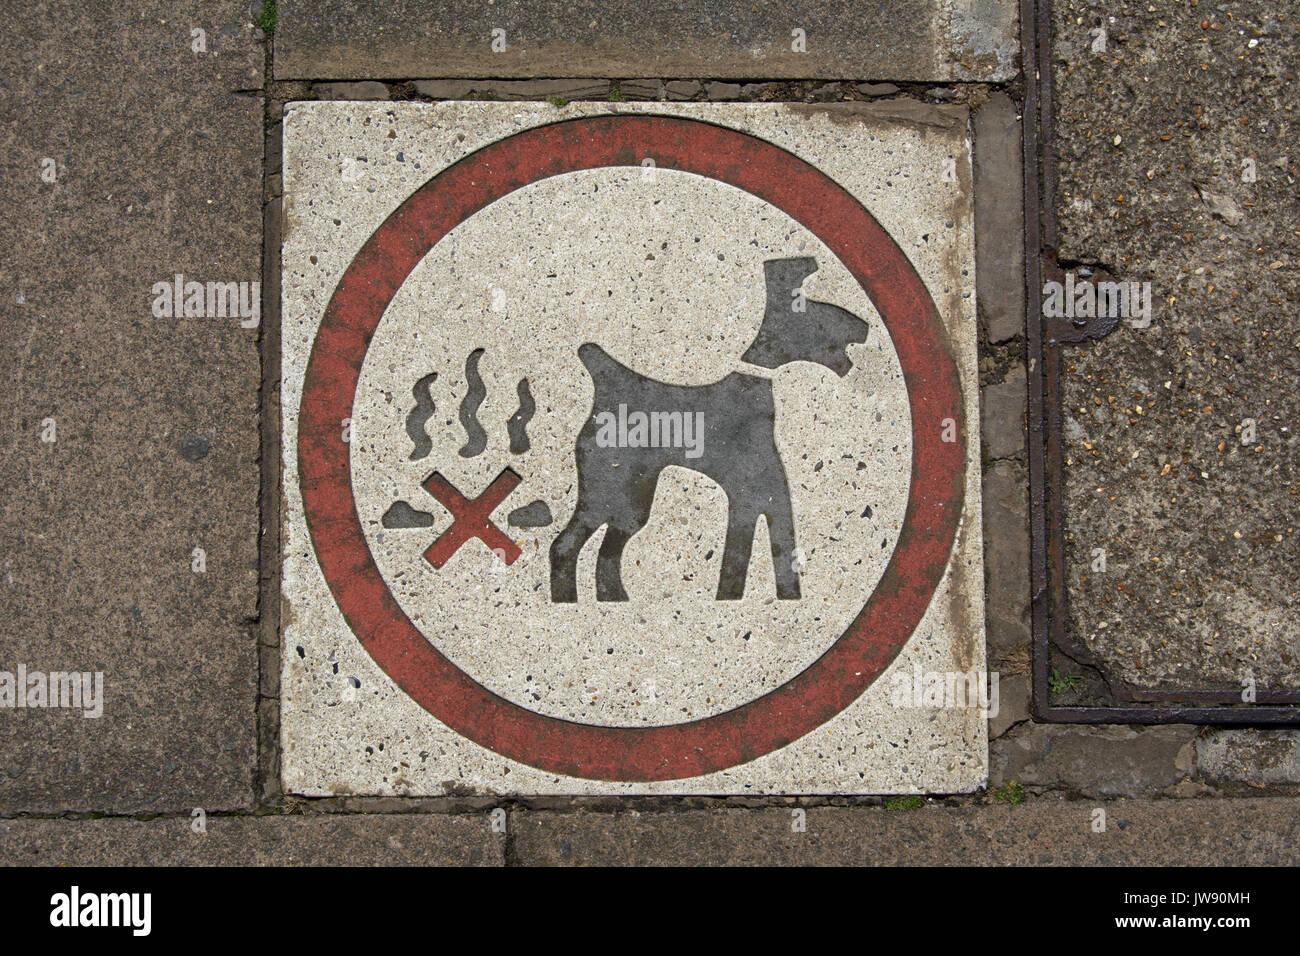 Environment Act 2005 Dog fouling sign Dog poo mess fouling offence sign 9623 